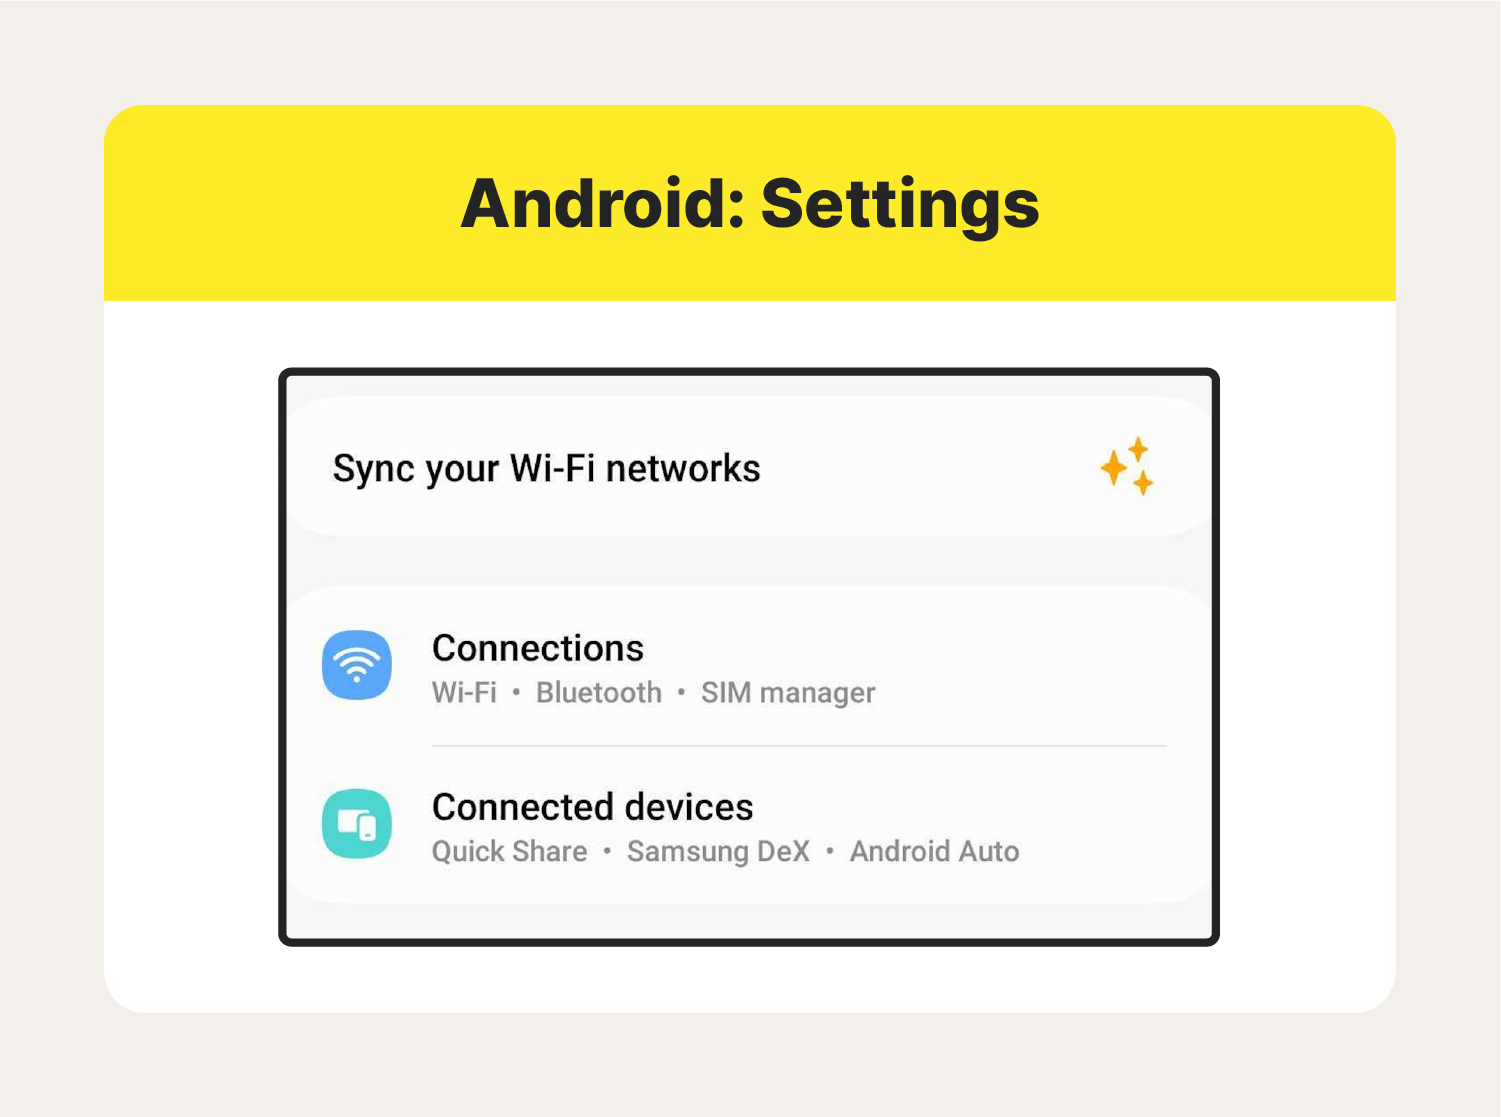 A screenshot showing where Android user’s can find the mobile hotspot settings on their phones. 